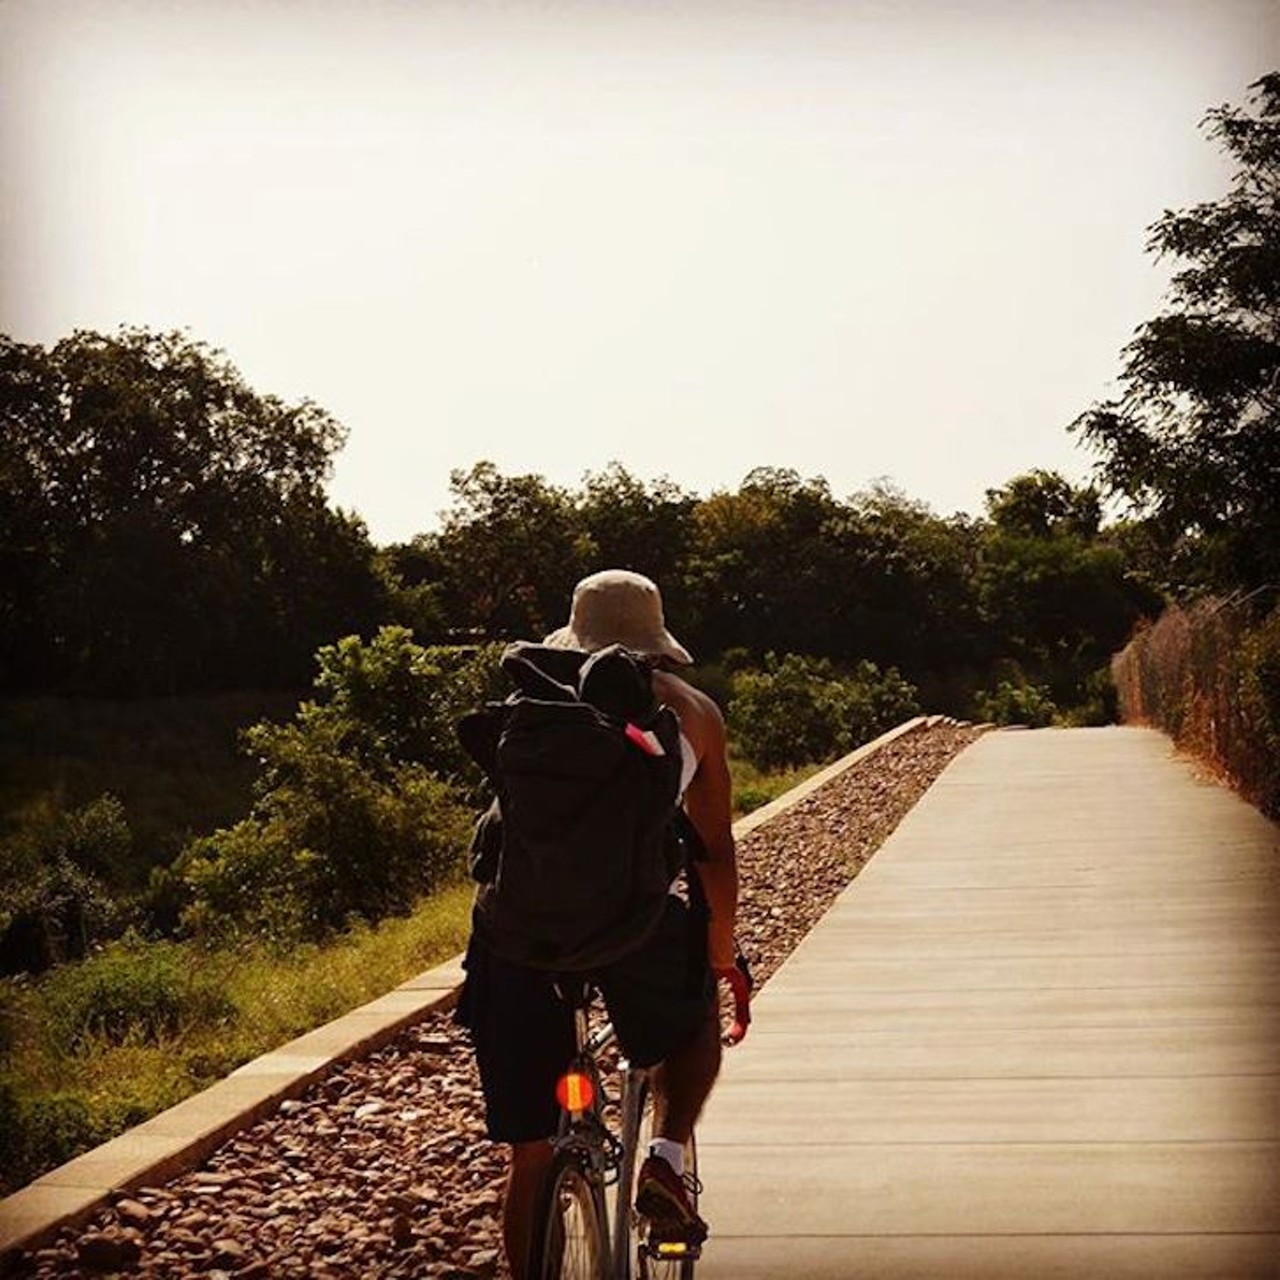 Take a long ride along the Mission Reach, and low-key think about getting in shape.
Photo via Instagram (whiskeyandsmores)